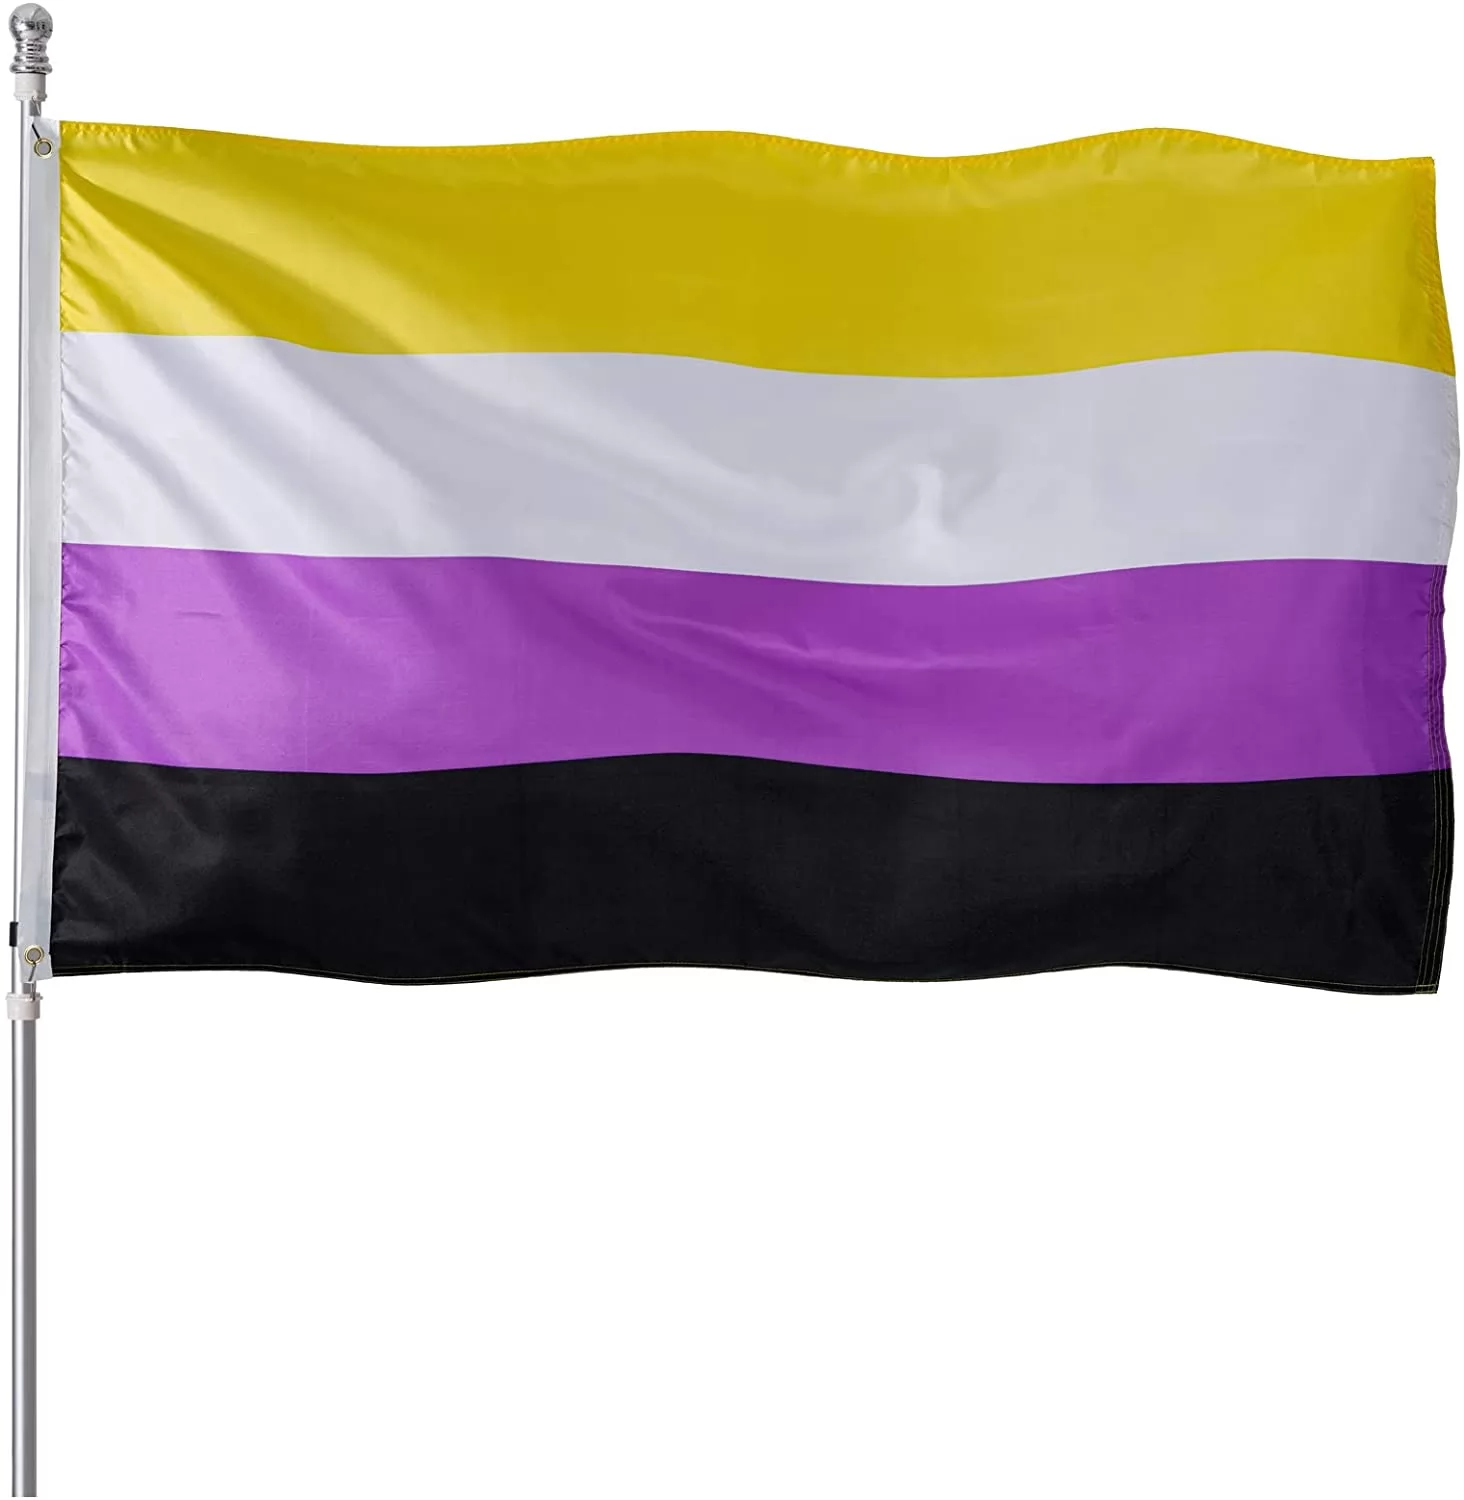 Homissor Non-Binary Pride Flag 3x5 Heavy Duty Polyester LGBTQIA NB Pride Genderqueer Gender Identity Flags for Outdoor Wall with Brass Grommets & Dura